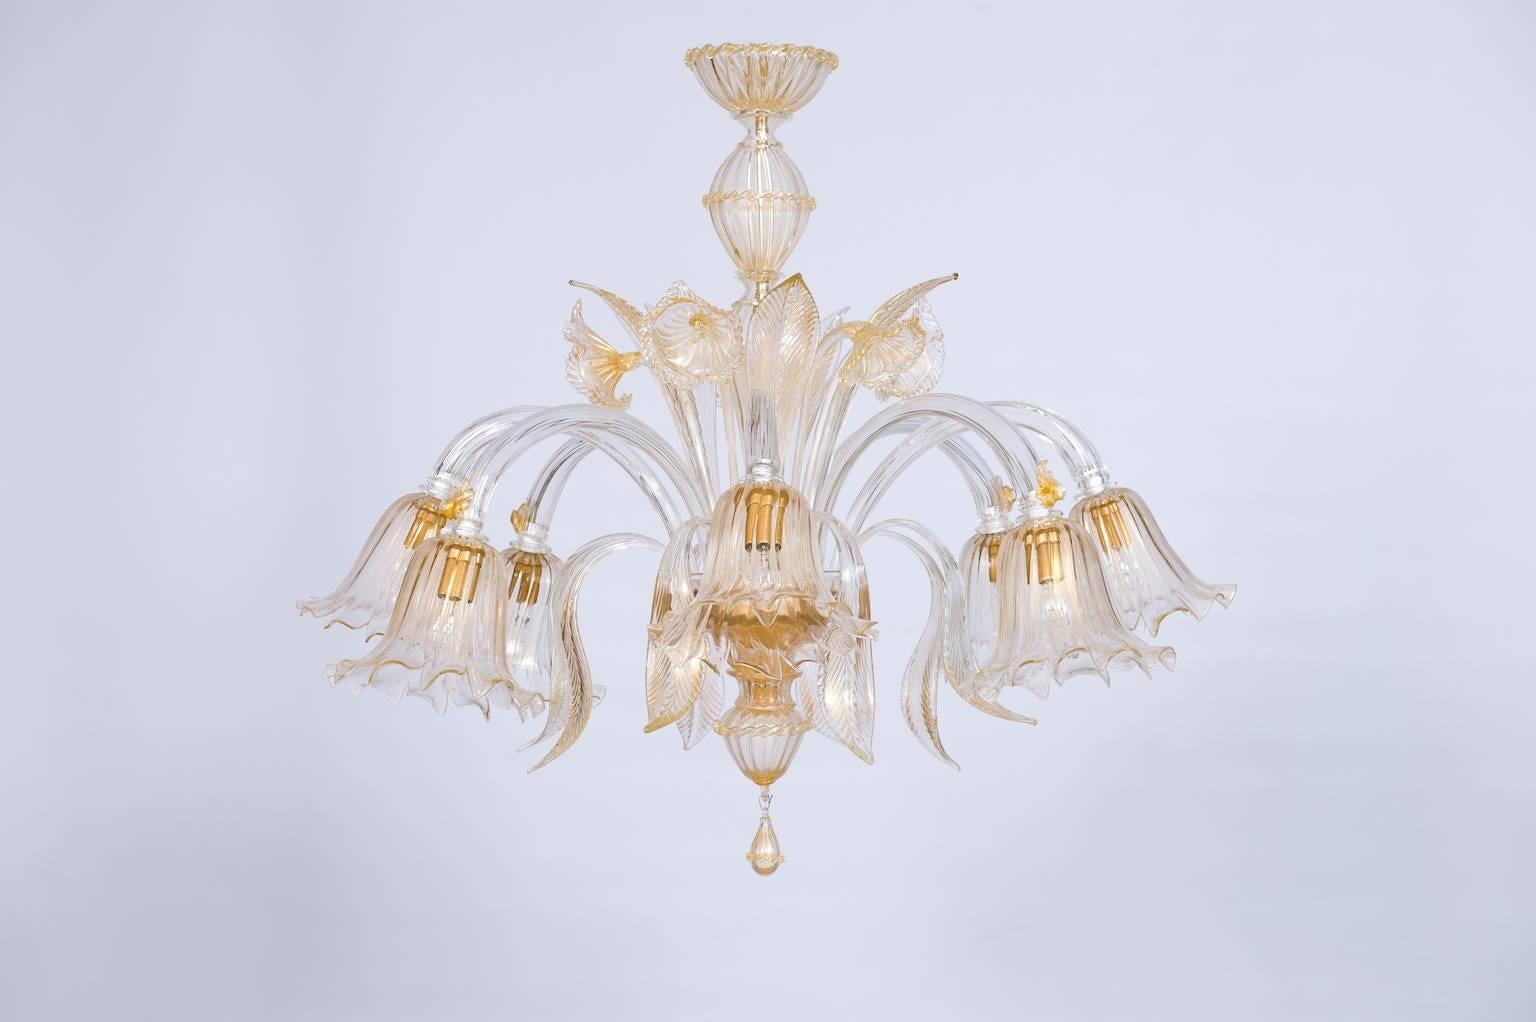 Hand-Crafted Italian Chandelier in Murano Glass and 24-Karat Gold, 1990s